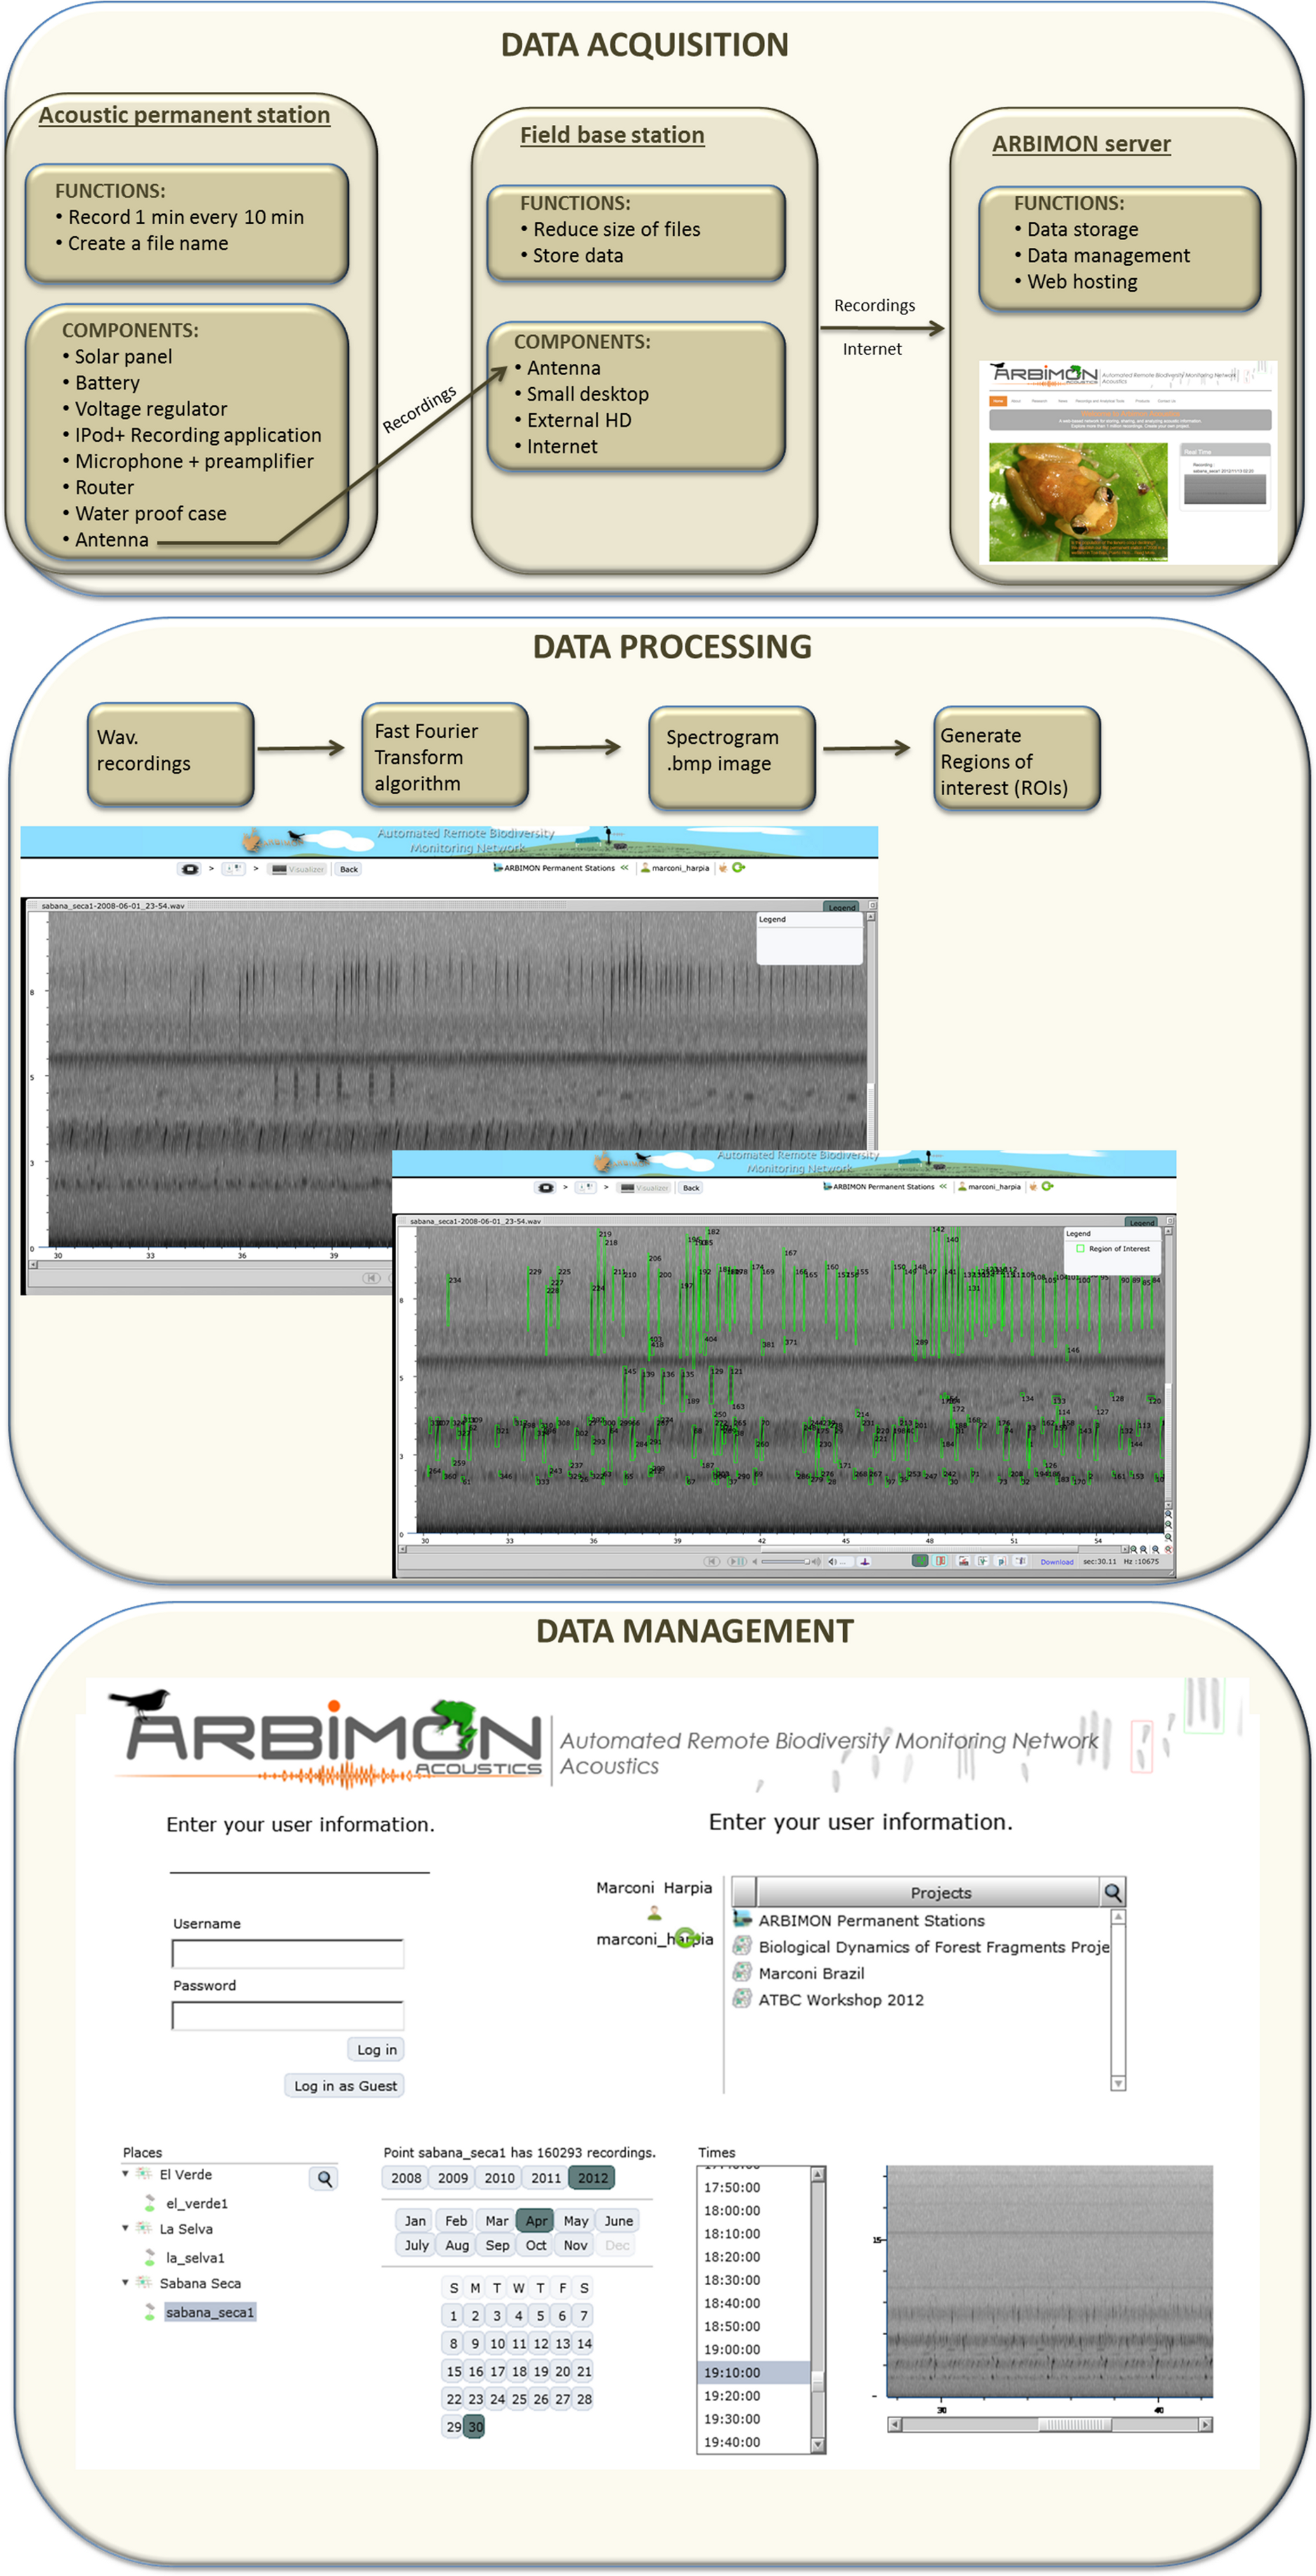 Real-time bioacoustics monitoring and automated species identification  [PeerJ]